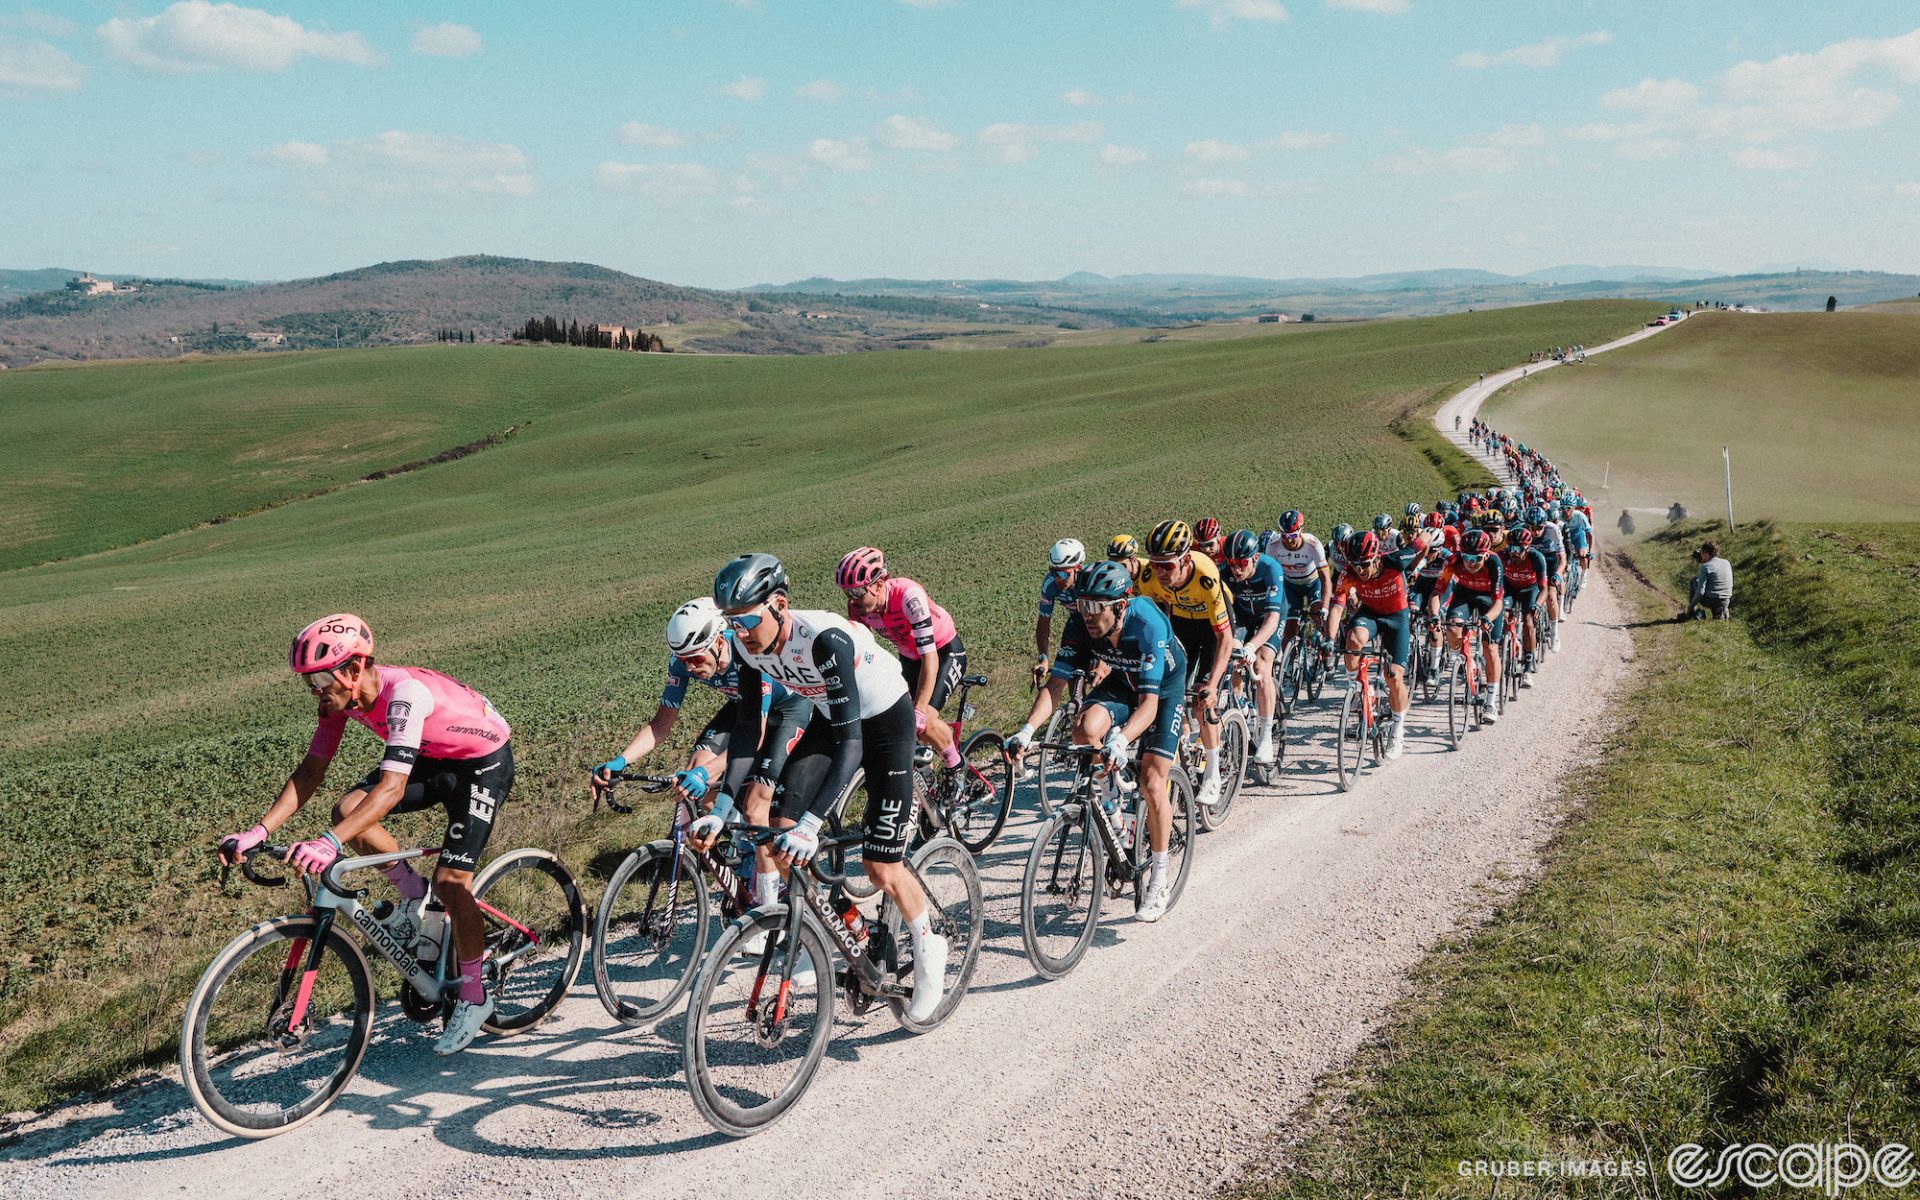 The pack races at the 2023 Strade Bianche. They're on a gravel sector, winding through just-greening fields amid rolling hills.